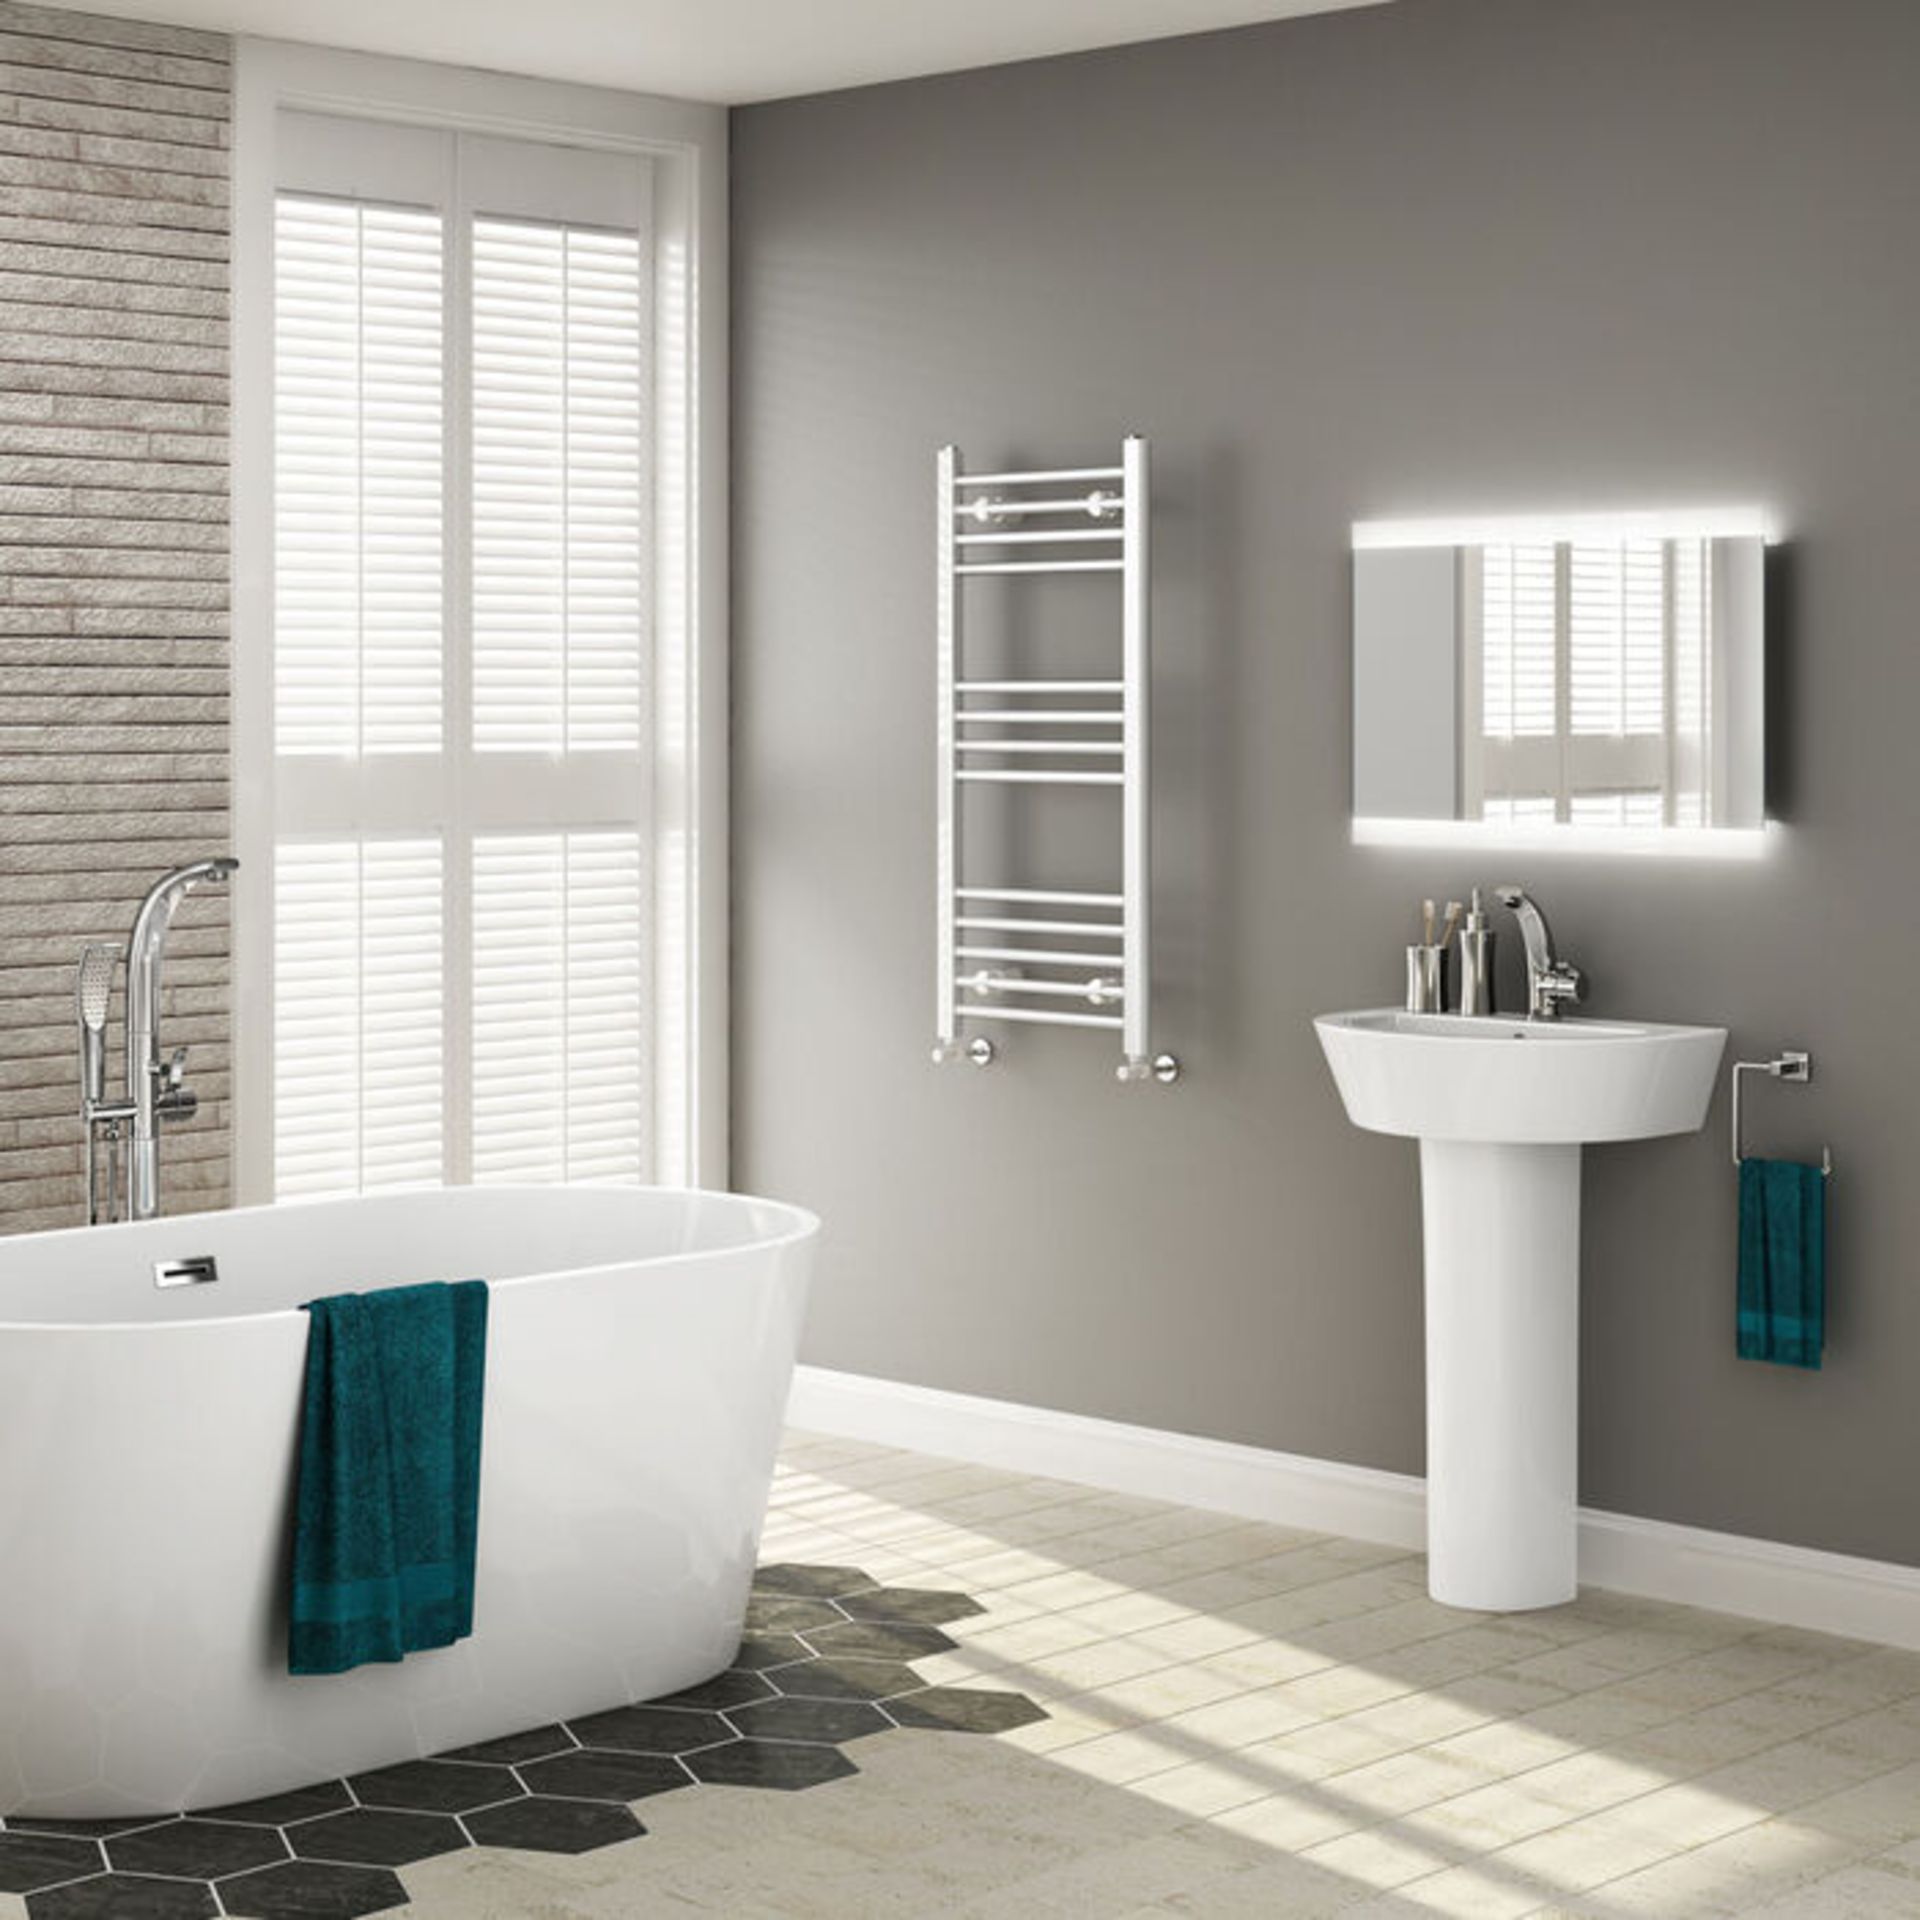 (RR22) 1000x450mm White Basic Towel radiator High gloss White. RRP £165.99. Made from low-carb...(( - Image 2 of 3